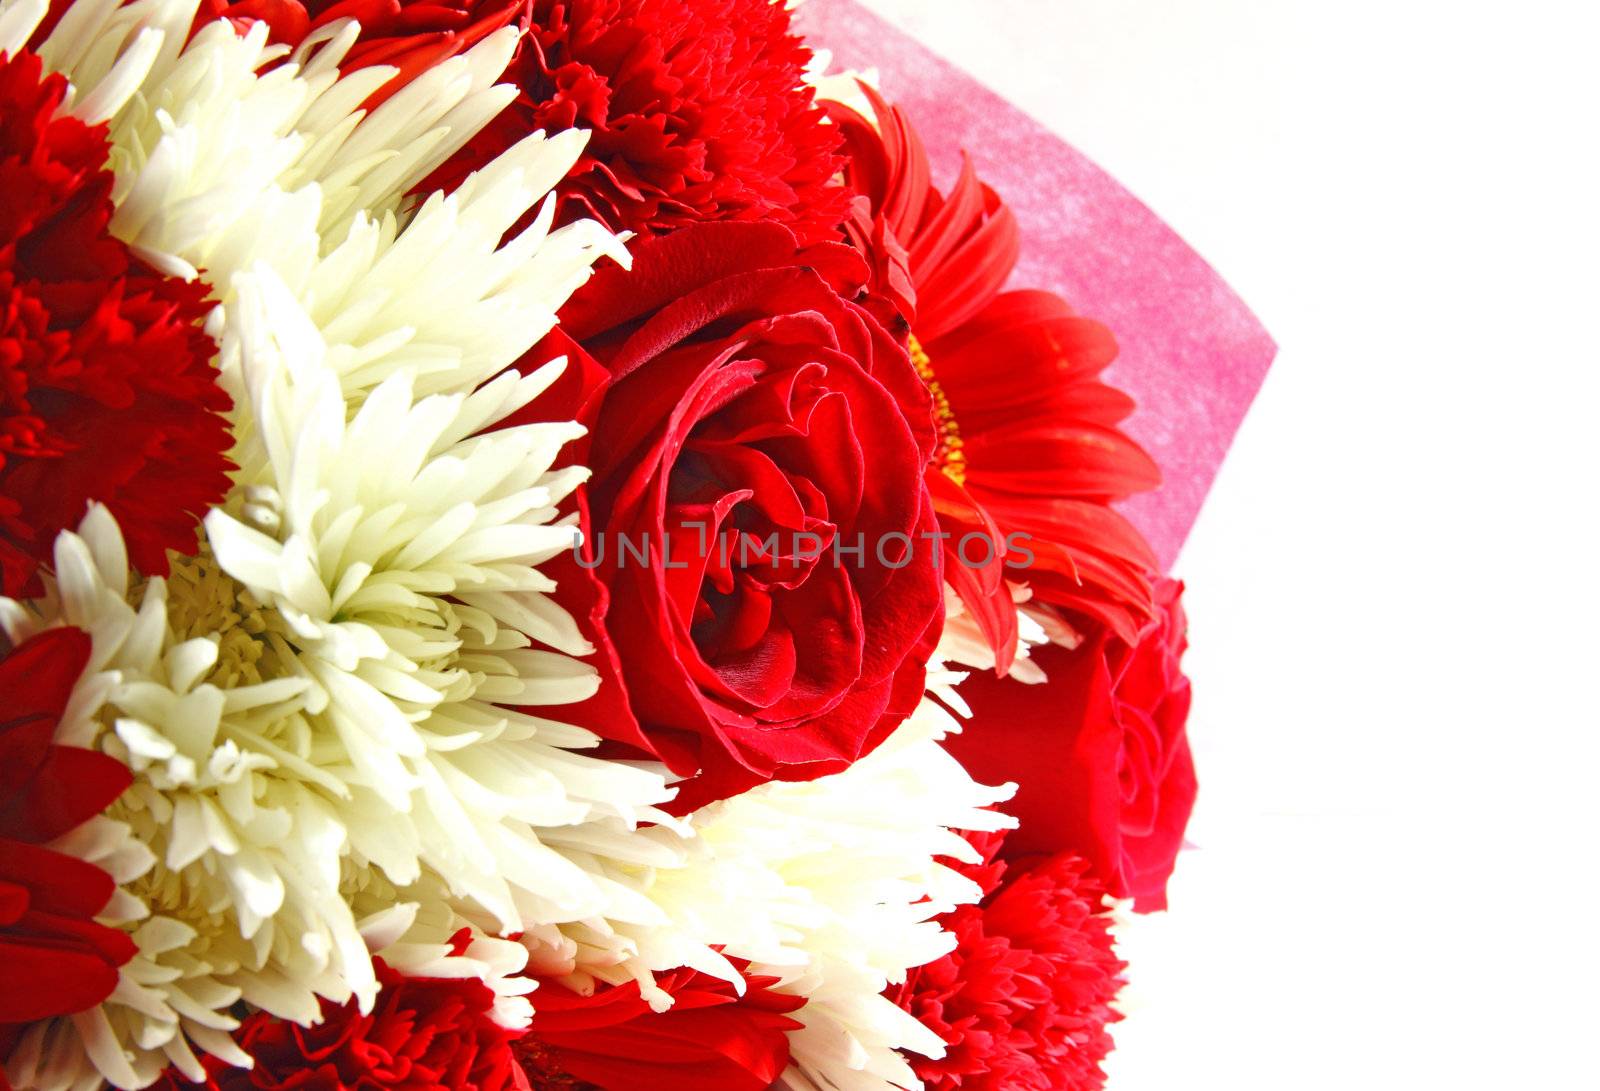 Red and white floral bouquet on white background by nuchylee